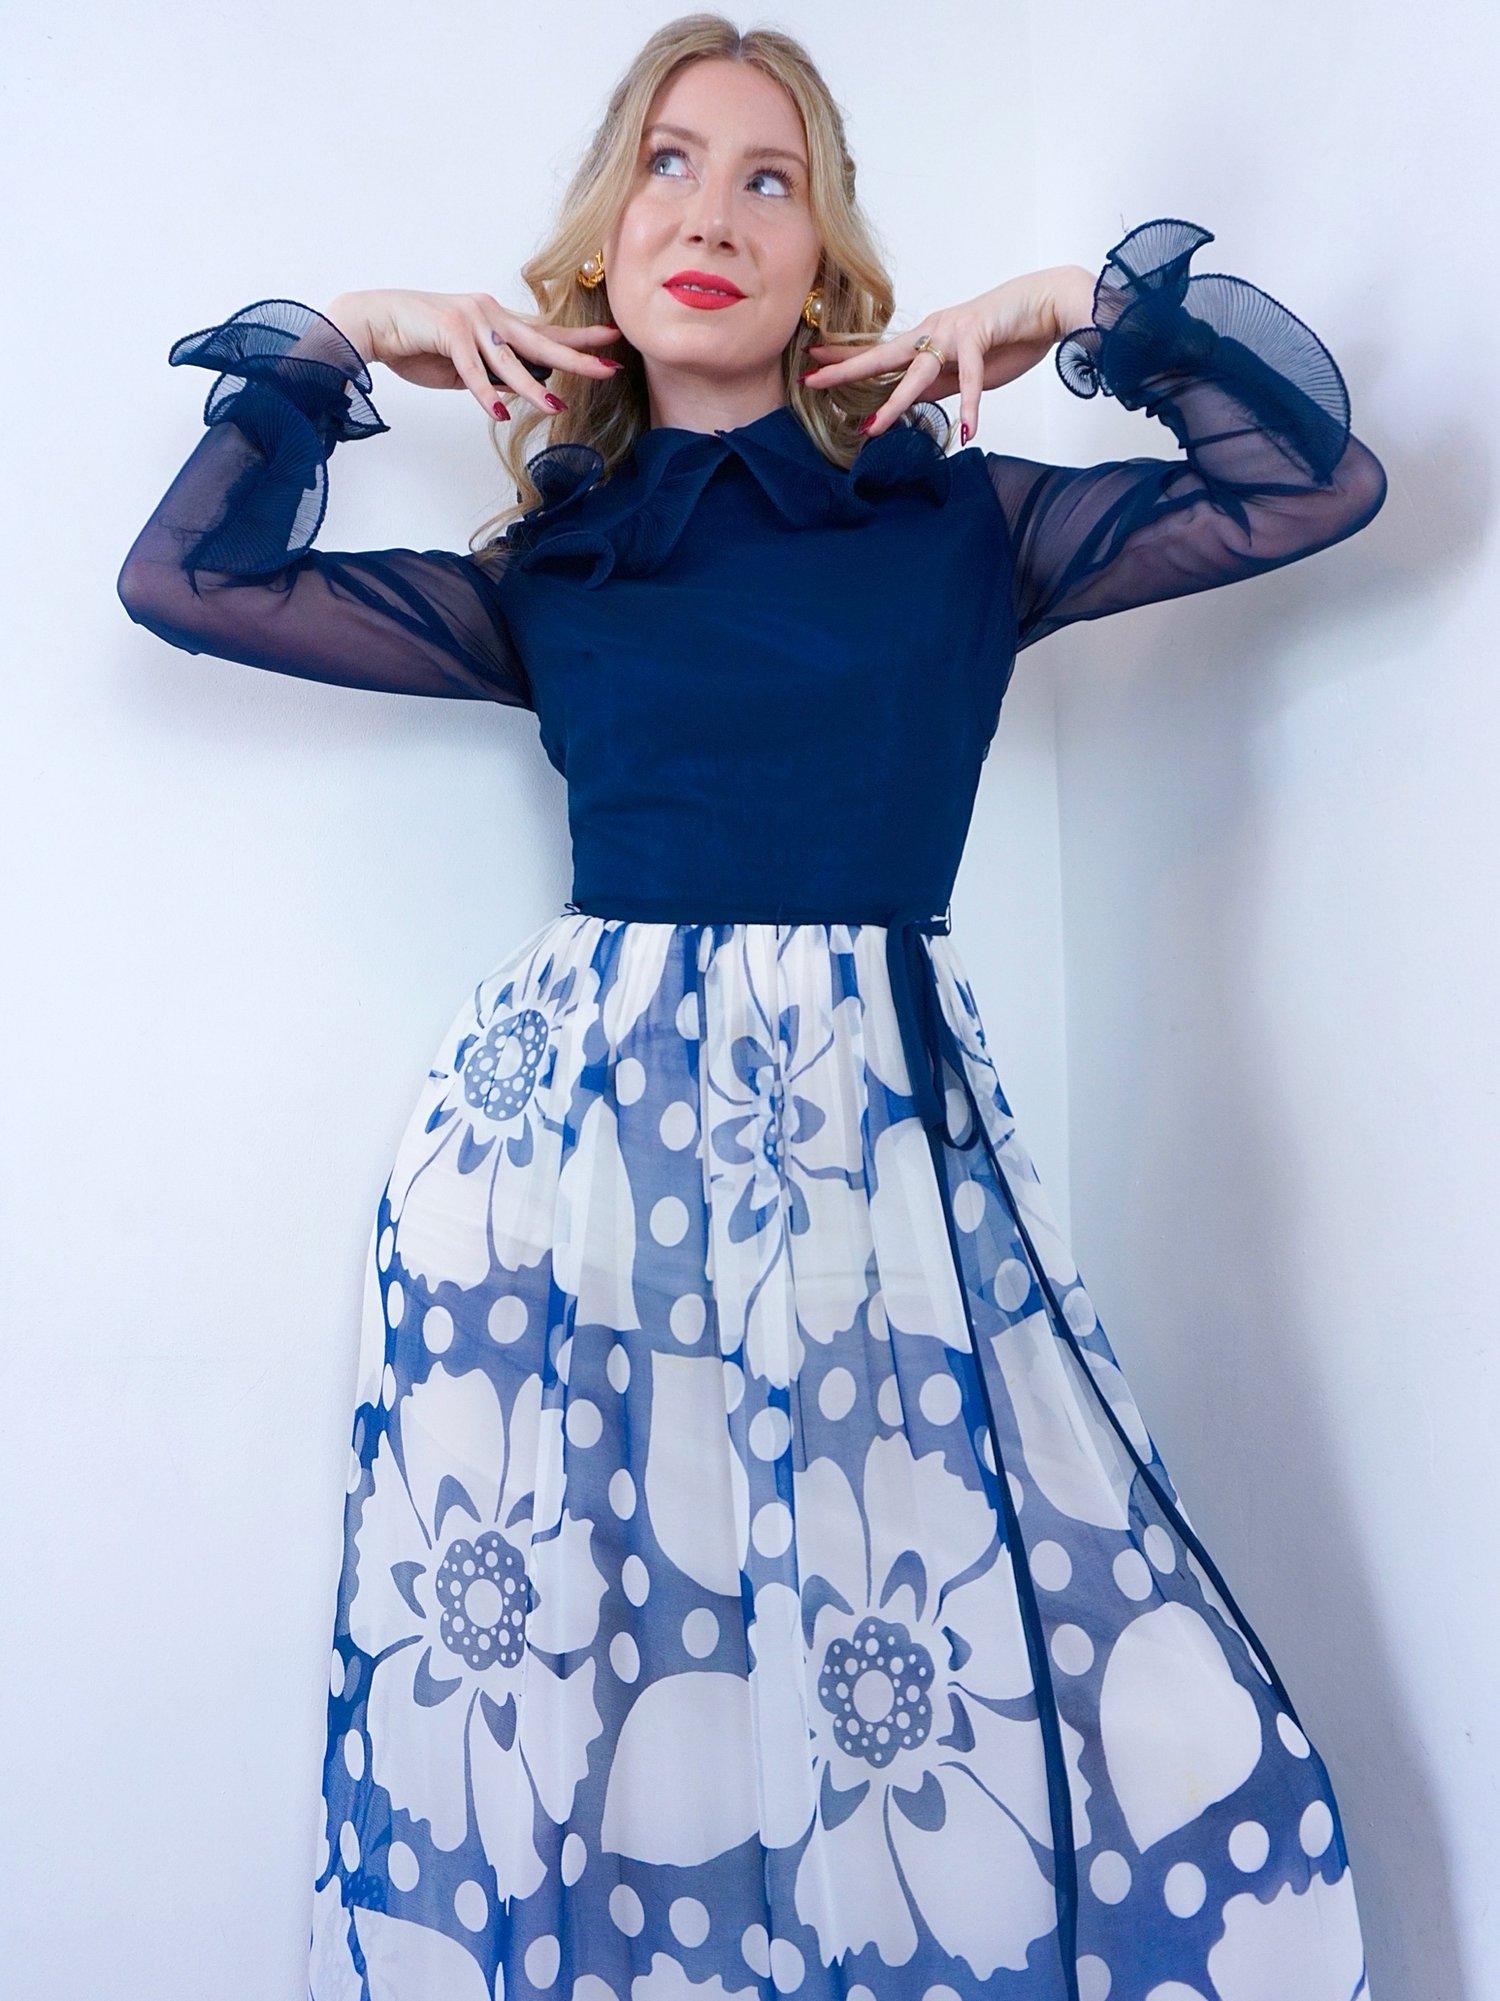 1960s Clive Byrne maxi dress in a navy blue and white floral design. 
She has a dark navy bodice with sheer long sleeves finished with a ruffled cuff that matches her ruffled Peter Pan collar.
A thin tie waist belt cinching in her waist, before